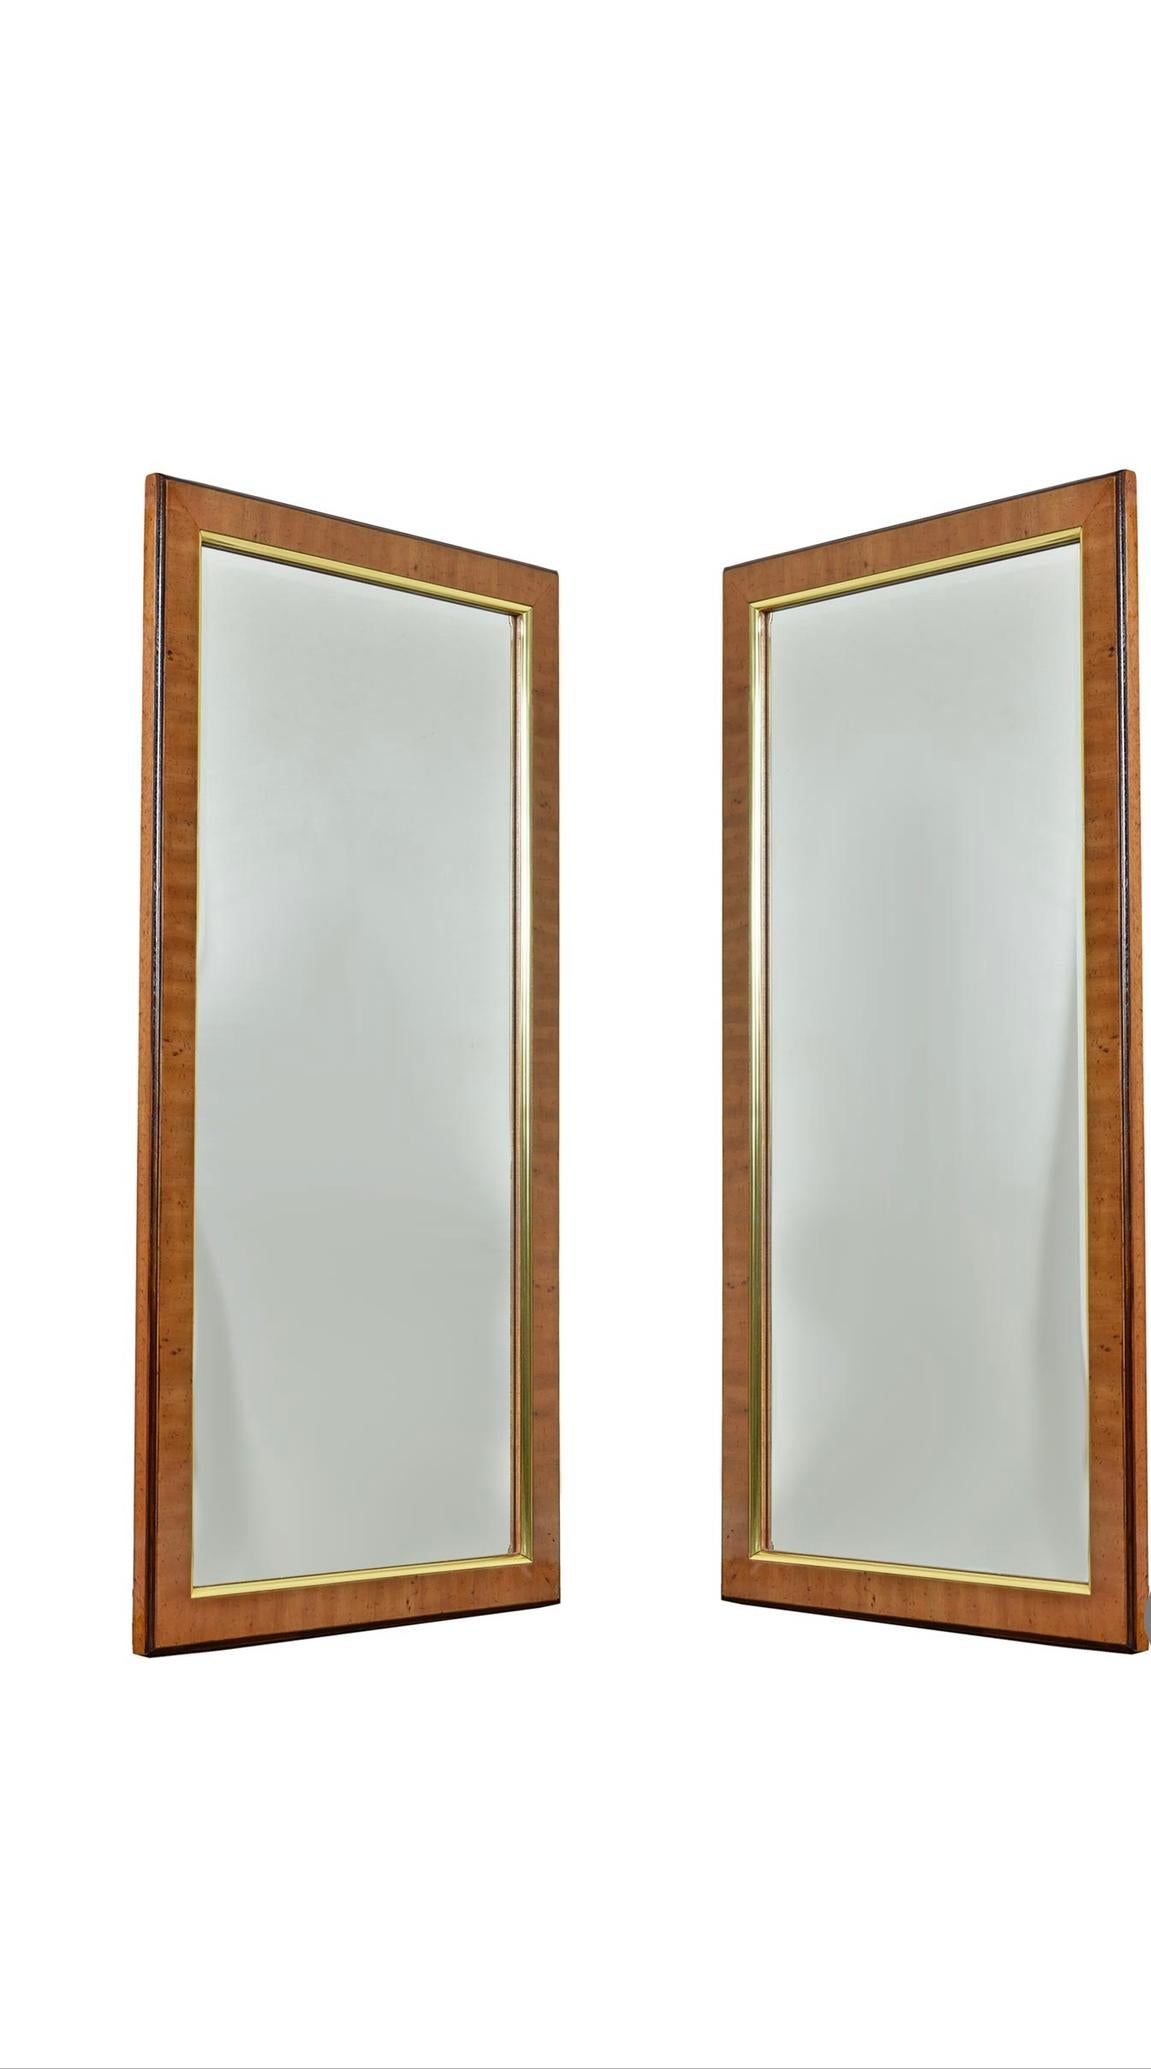 Pair of Bird's eye maple mirrors by Drexel Heritage. These are stamped the 